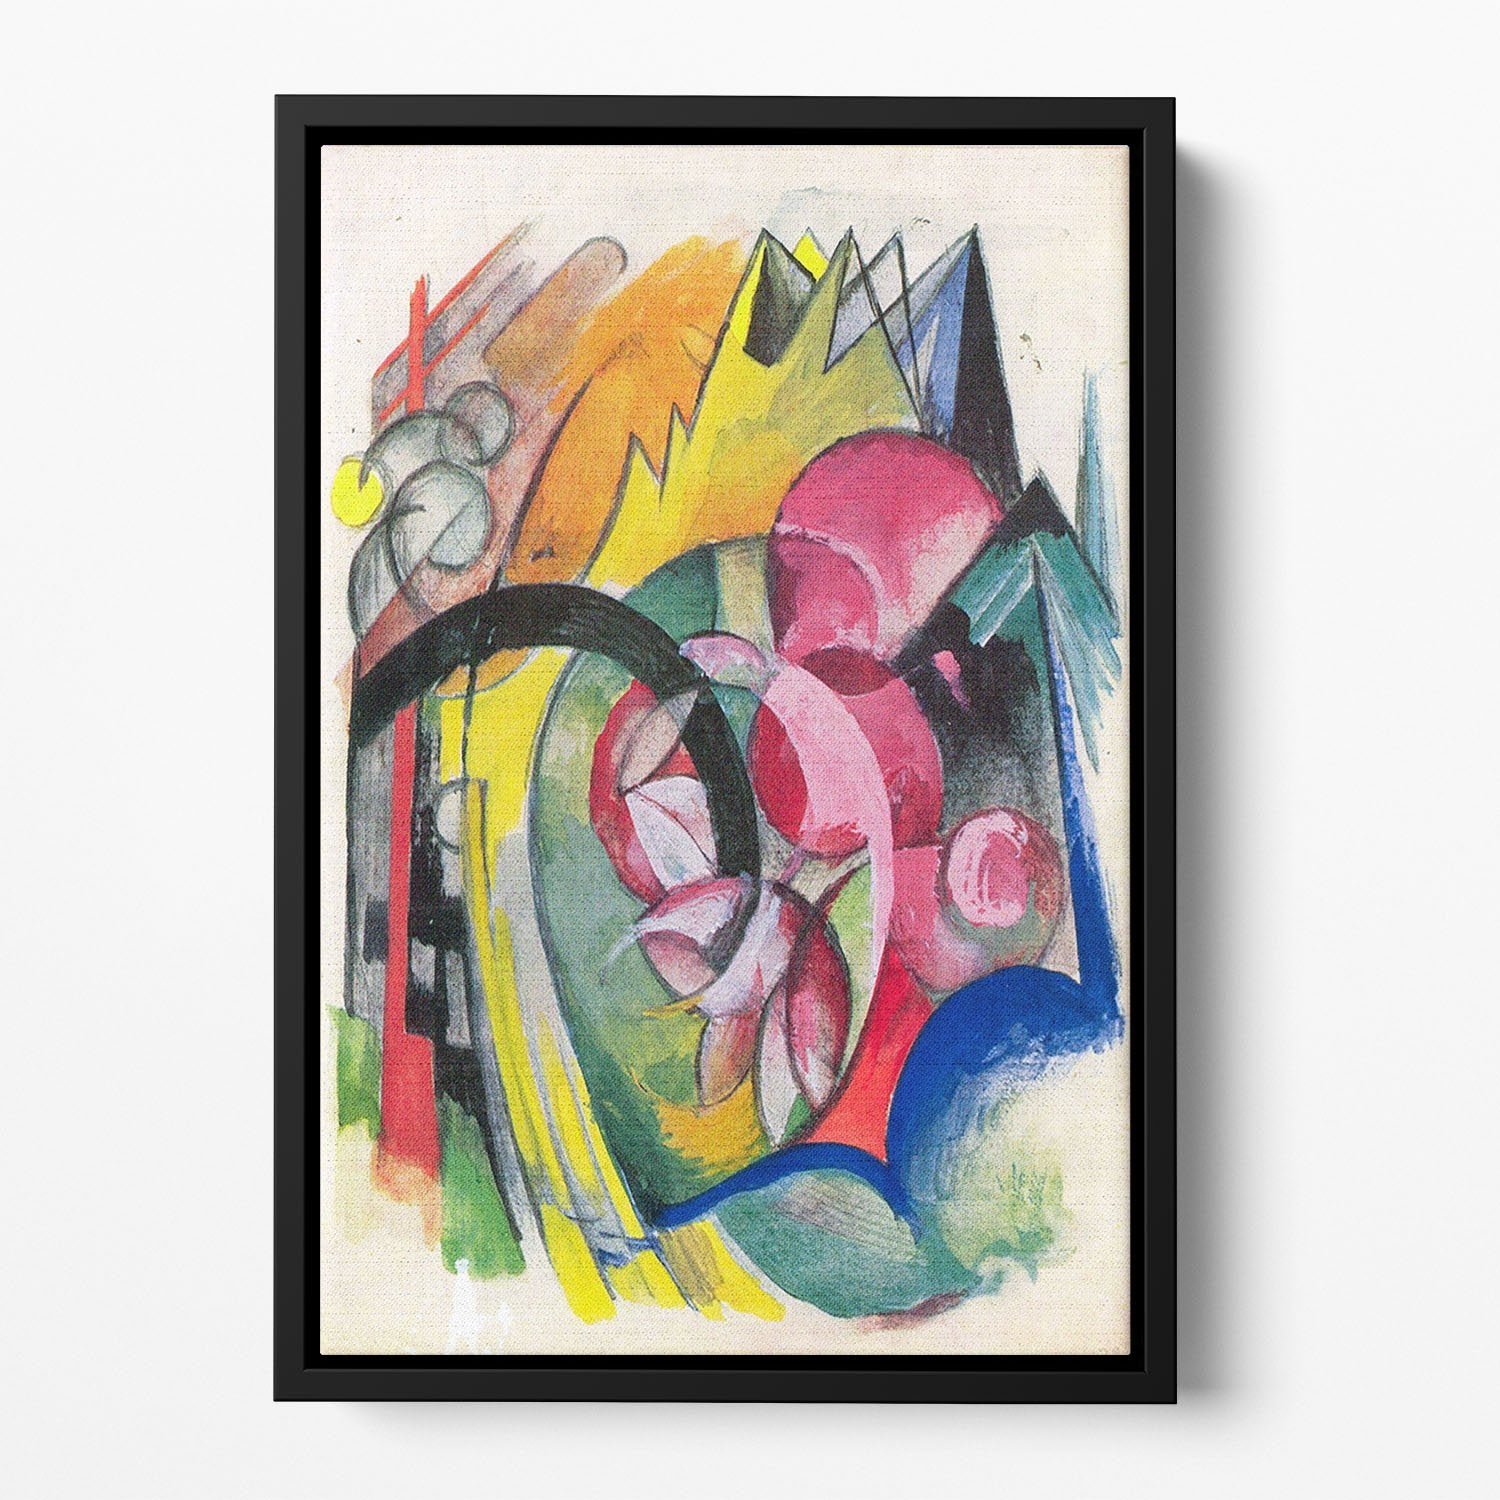 Small composition II by Franz Marc Floating Framed Canvas